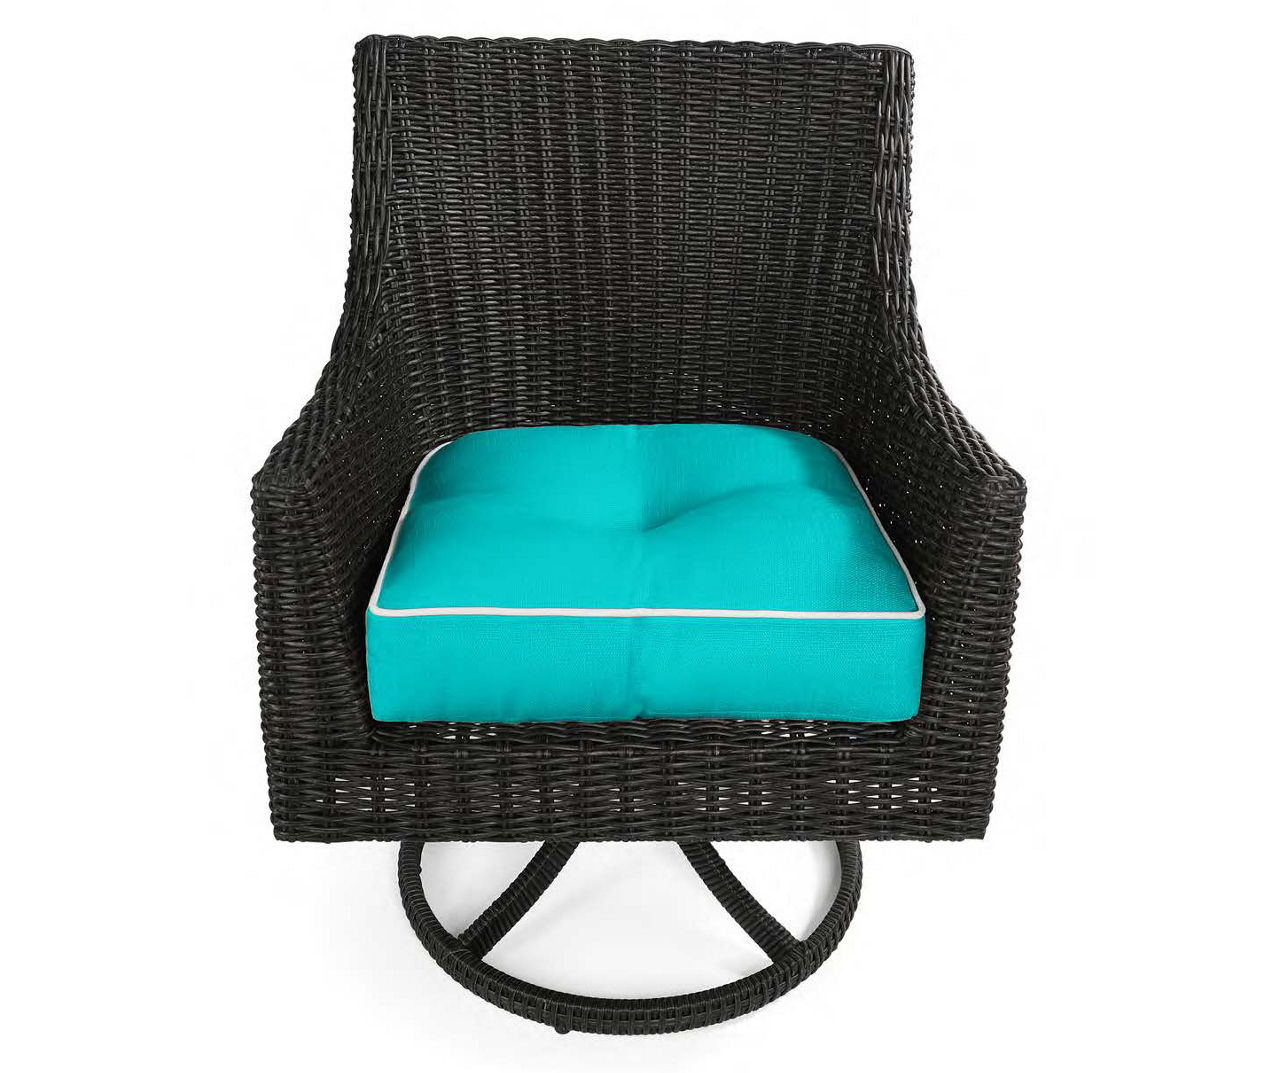 Turquoise 4-Piece Outdoor Wicker Chair Cushion Set